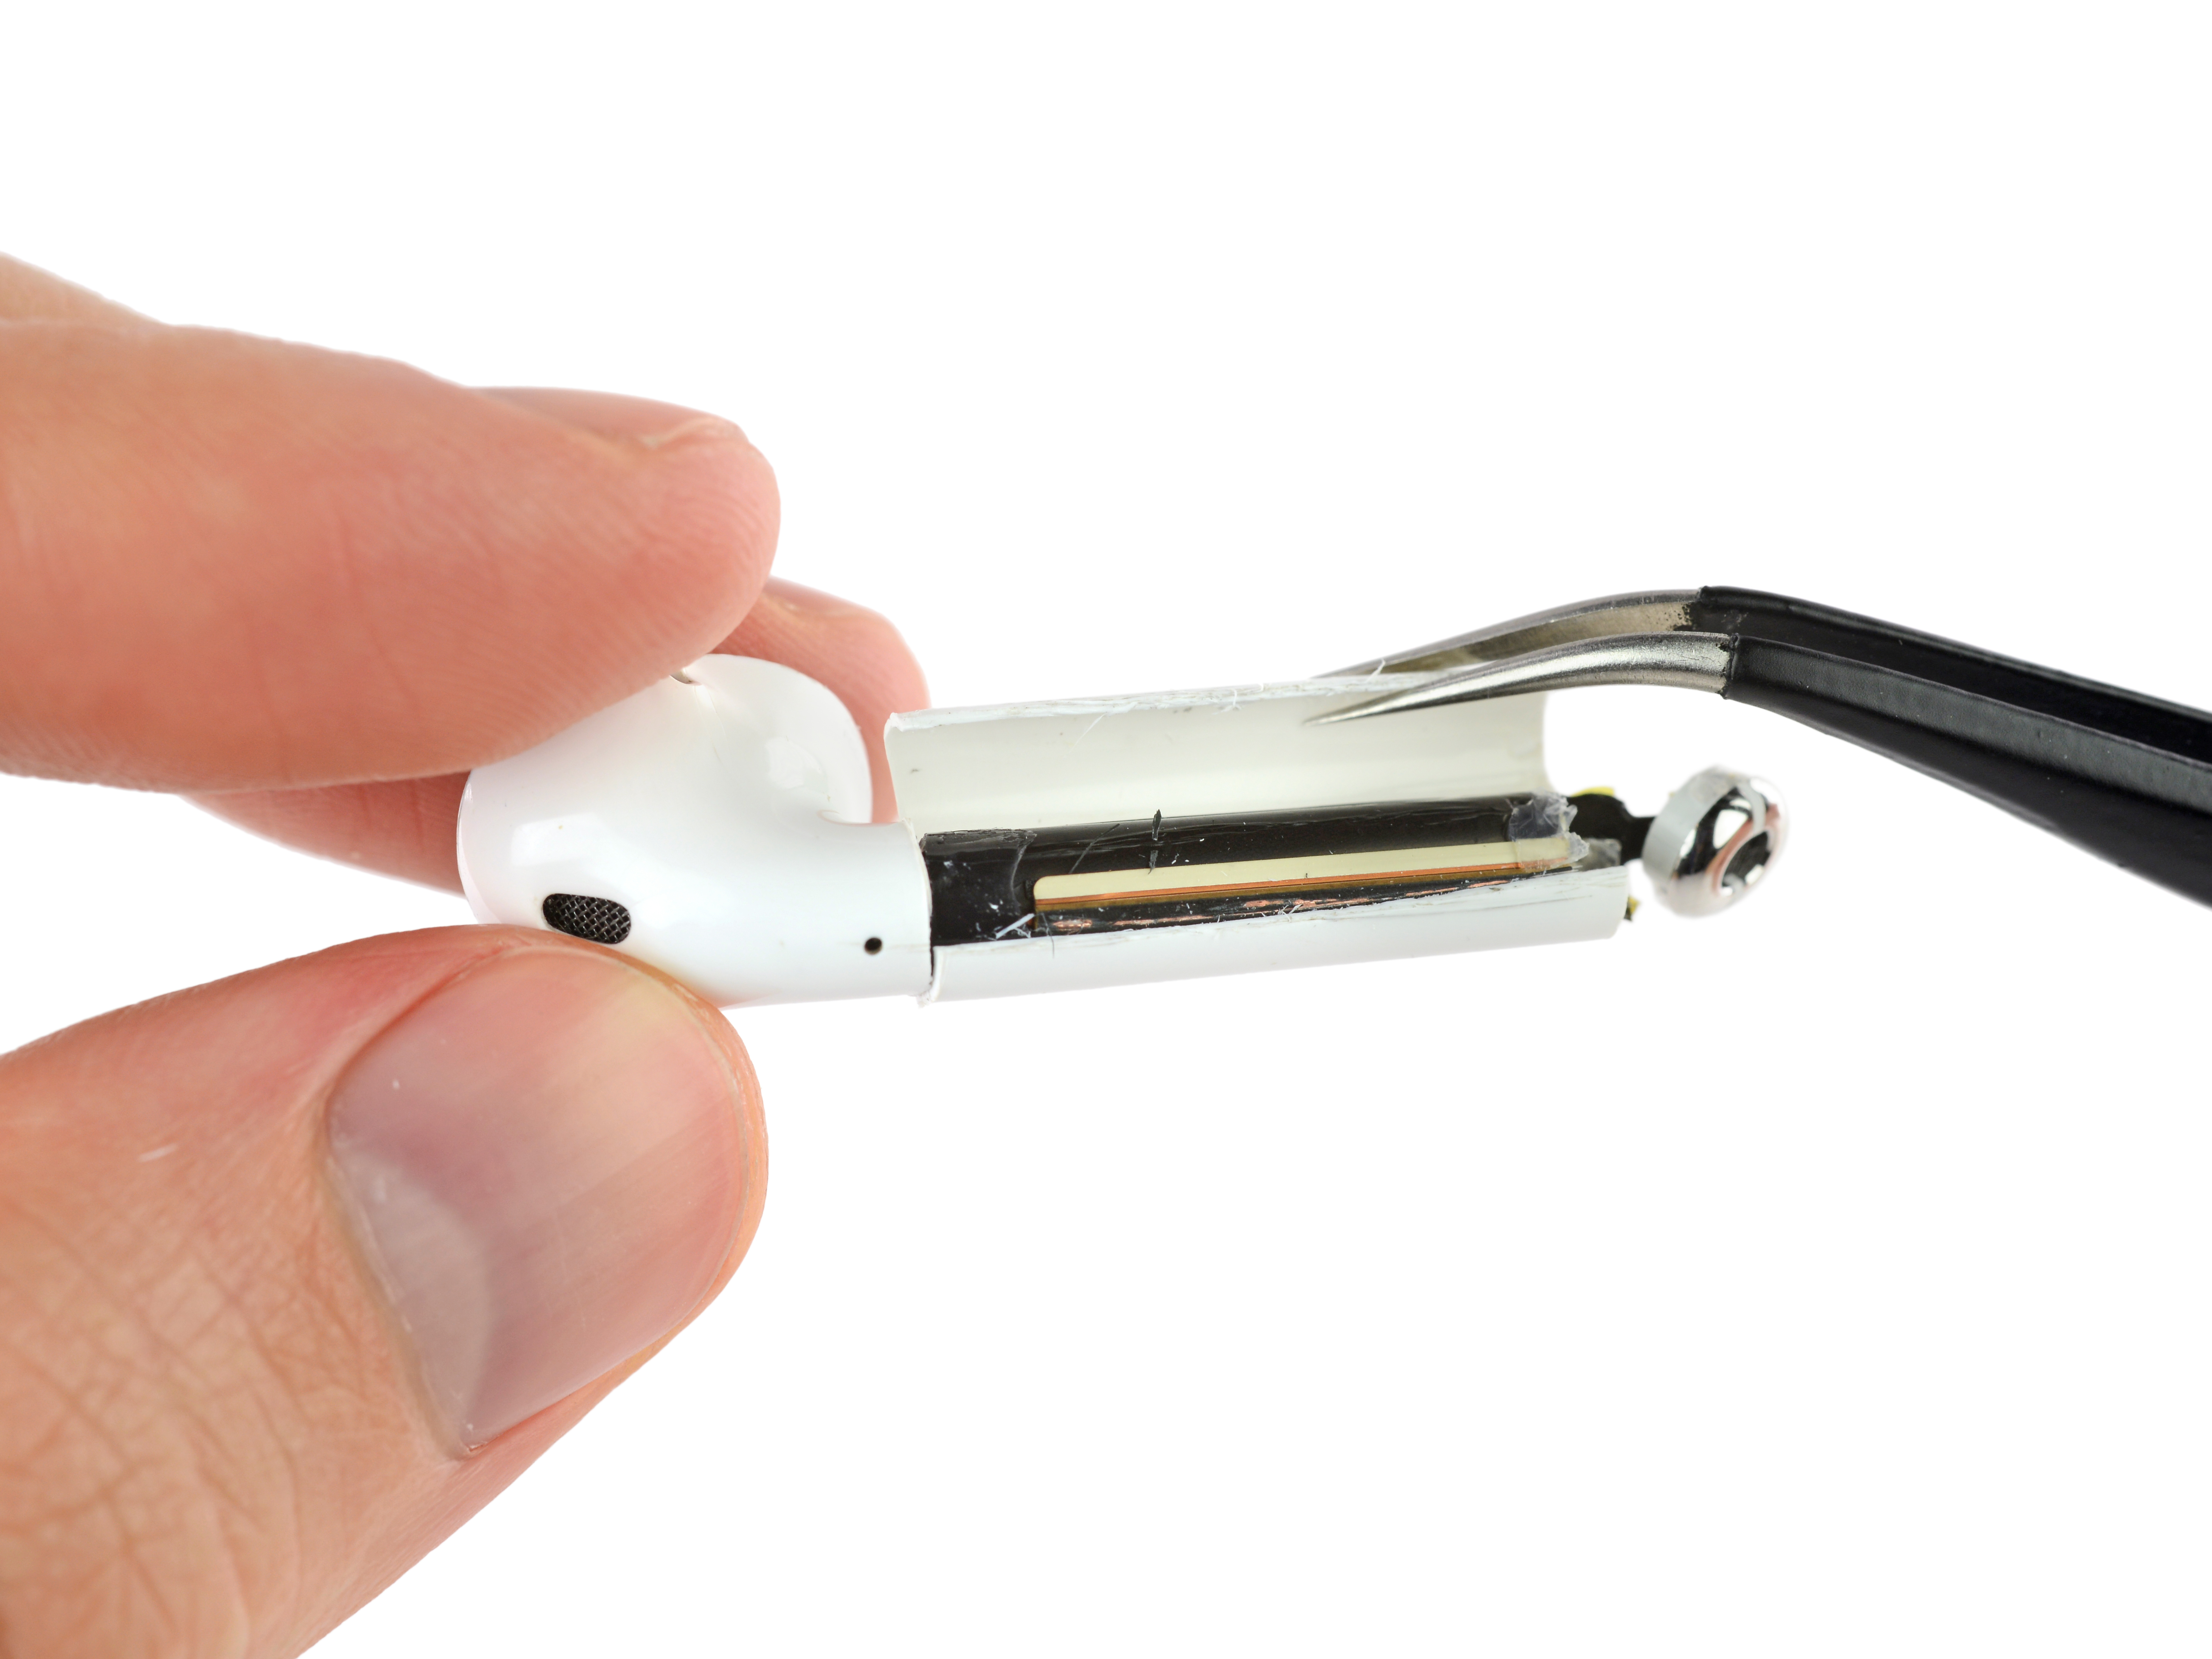 IFixit disassembly of AirPods